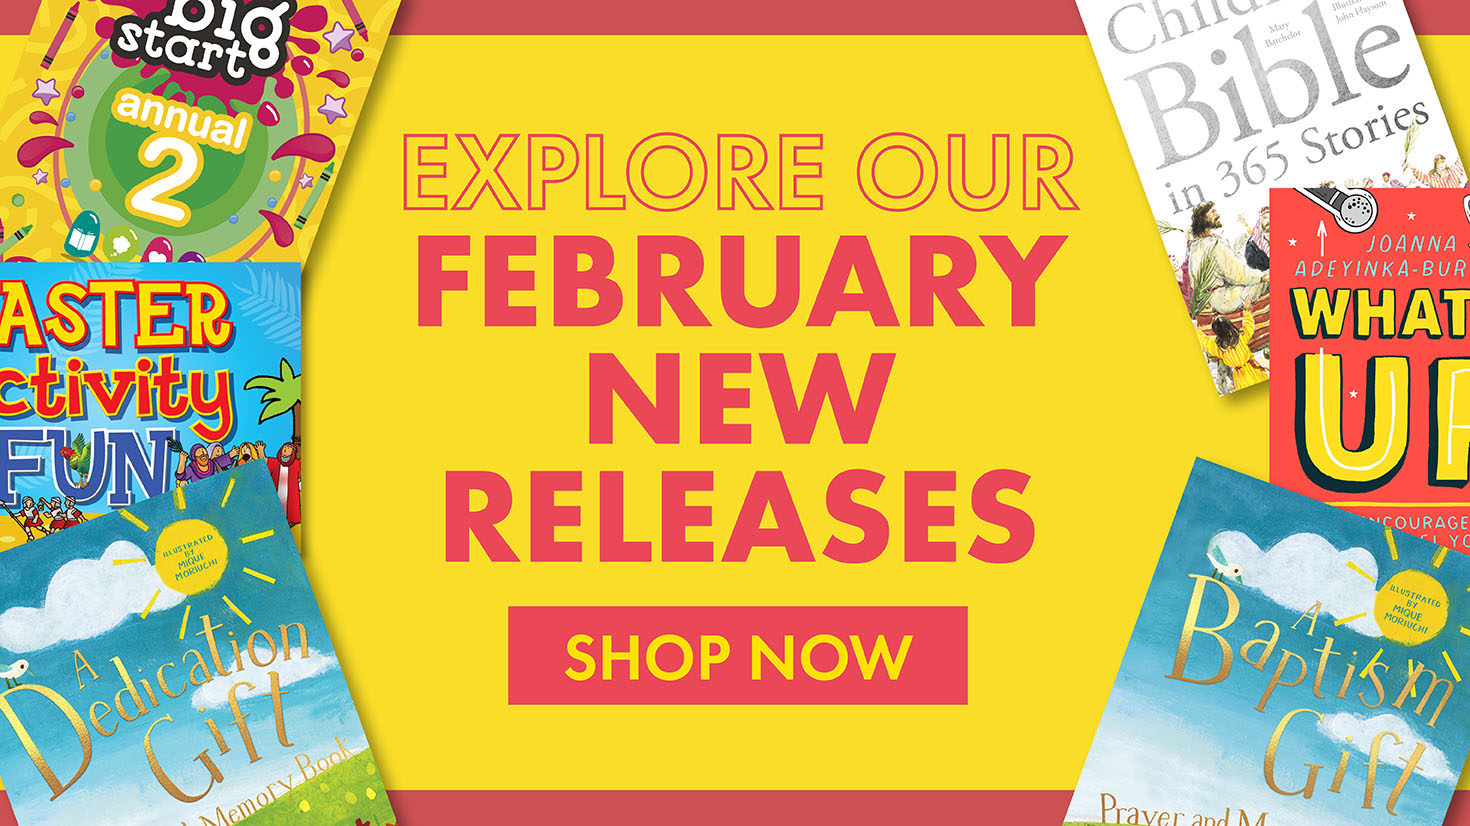 Explore Our February New Releases